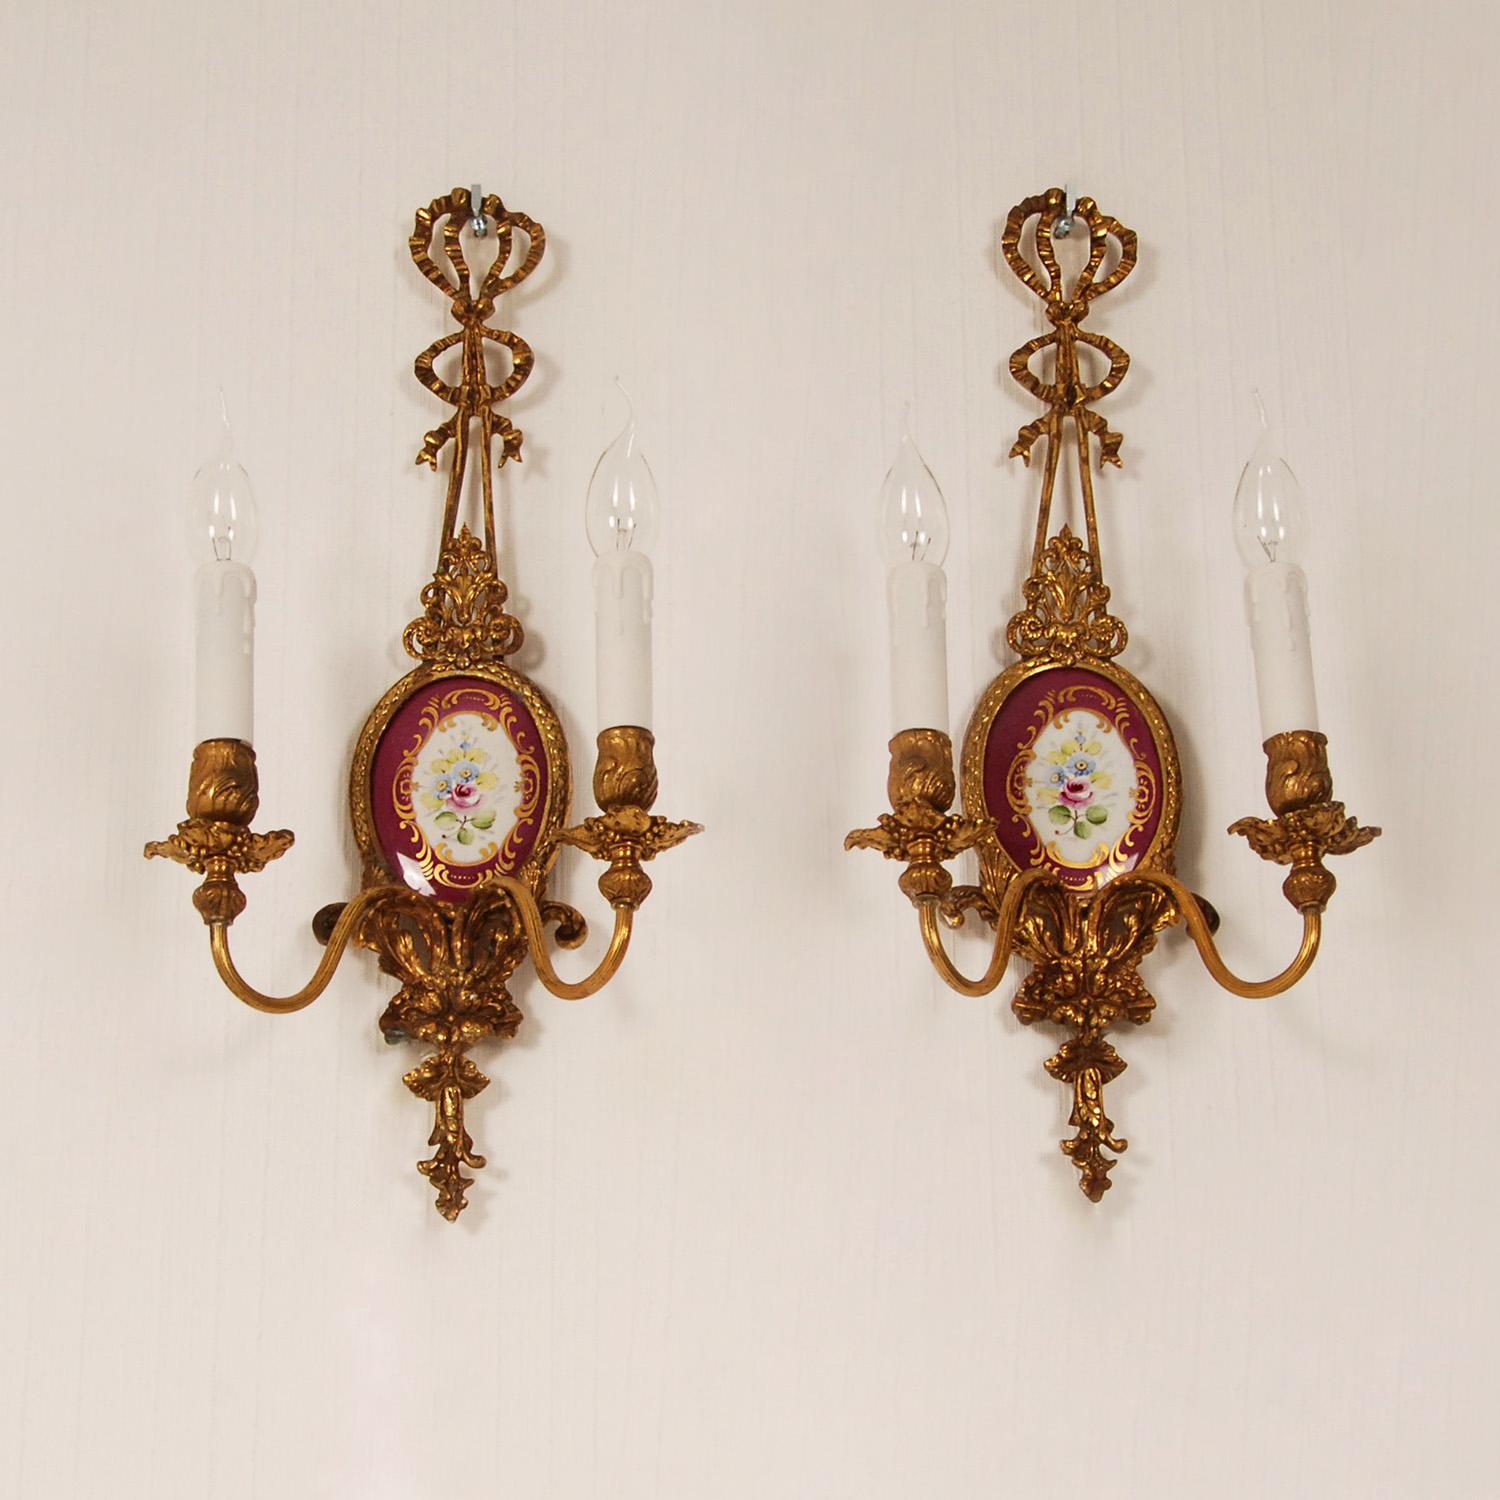 Vintage Wall Lamps Gold Gilt Bronze Ribbons Porcelain Neoclassical sconces pair  For Sale 3